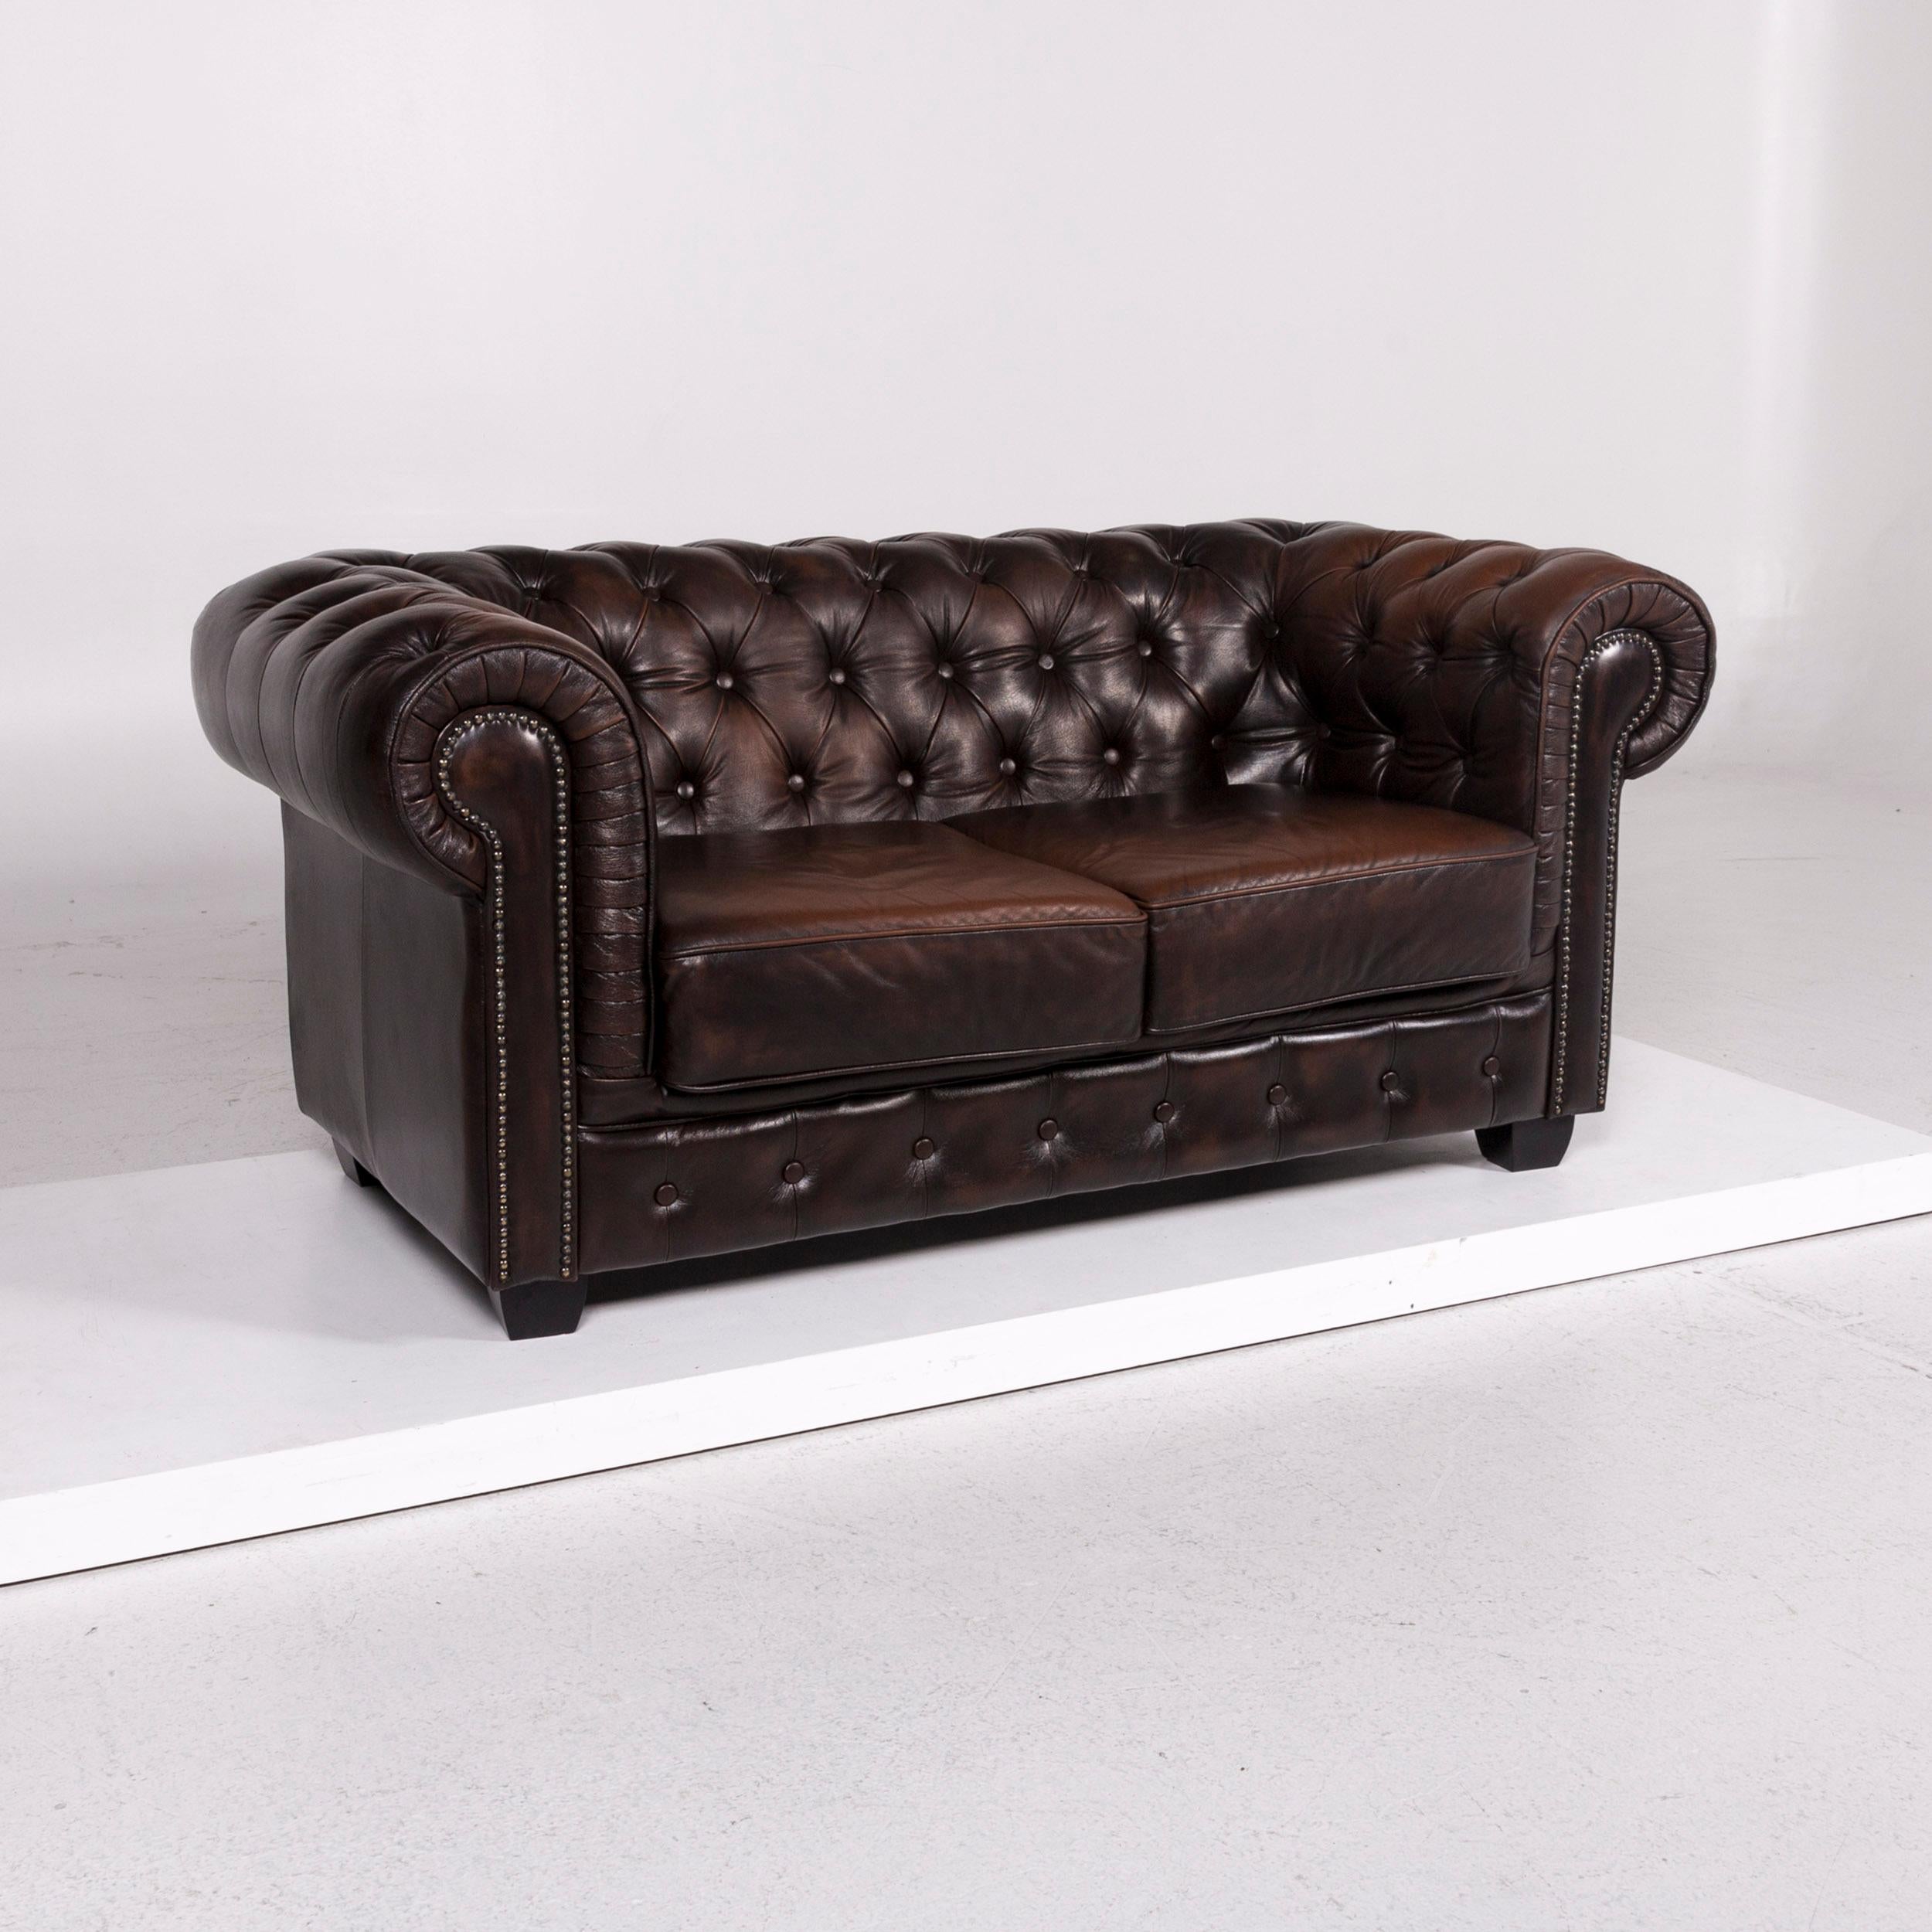 We bring to you a Chesterfield leather sofa brown dark brown two-seat retro couch.

 

 Product measurements in centimeters:
 

Depth 97
Width 172
Height 76
Seat-height 44
Rest-height 76
Seat-depth 57
Seat-width 108
Back-height 30.